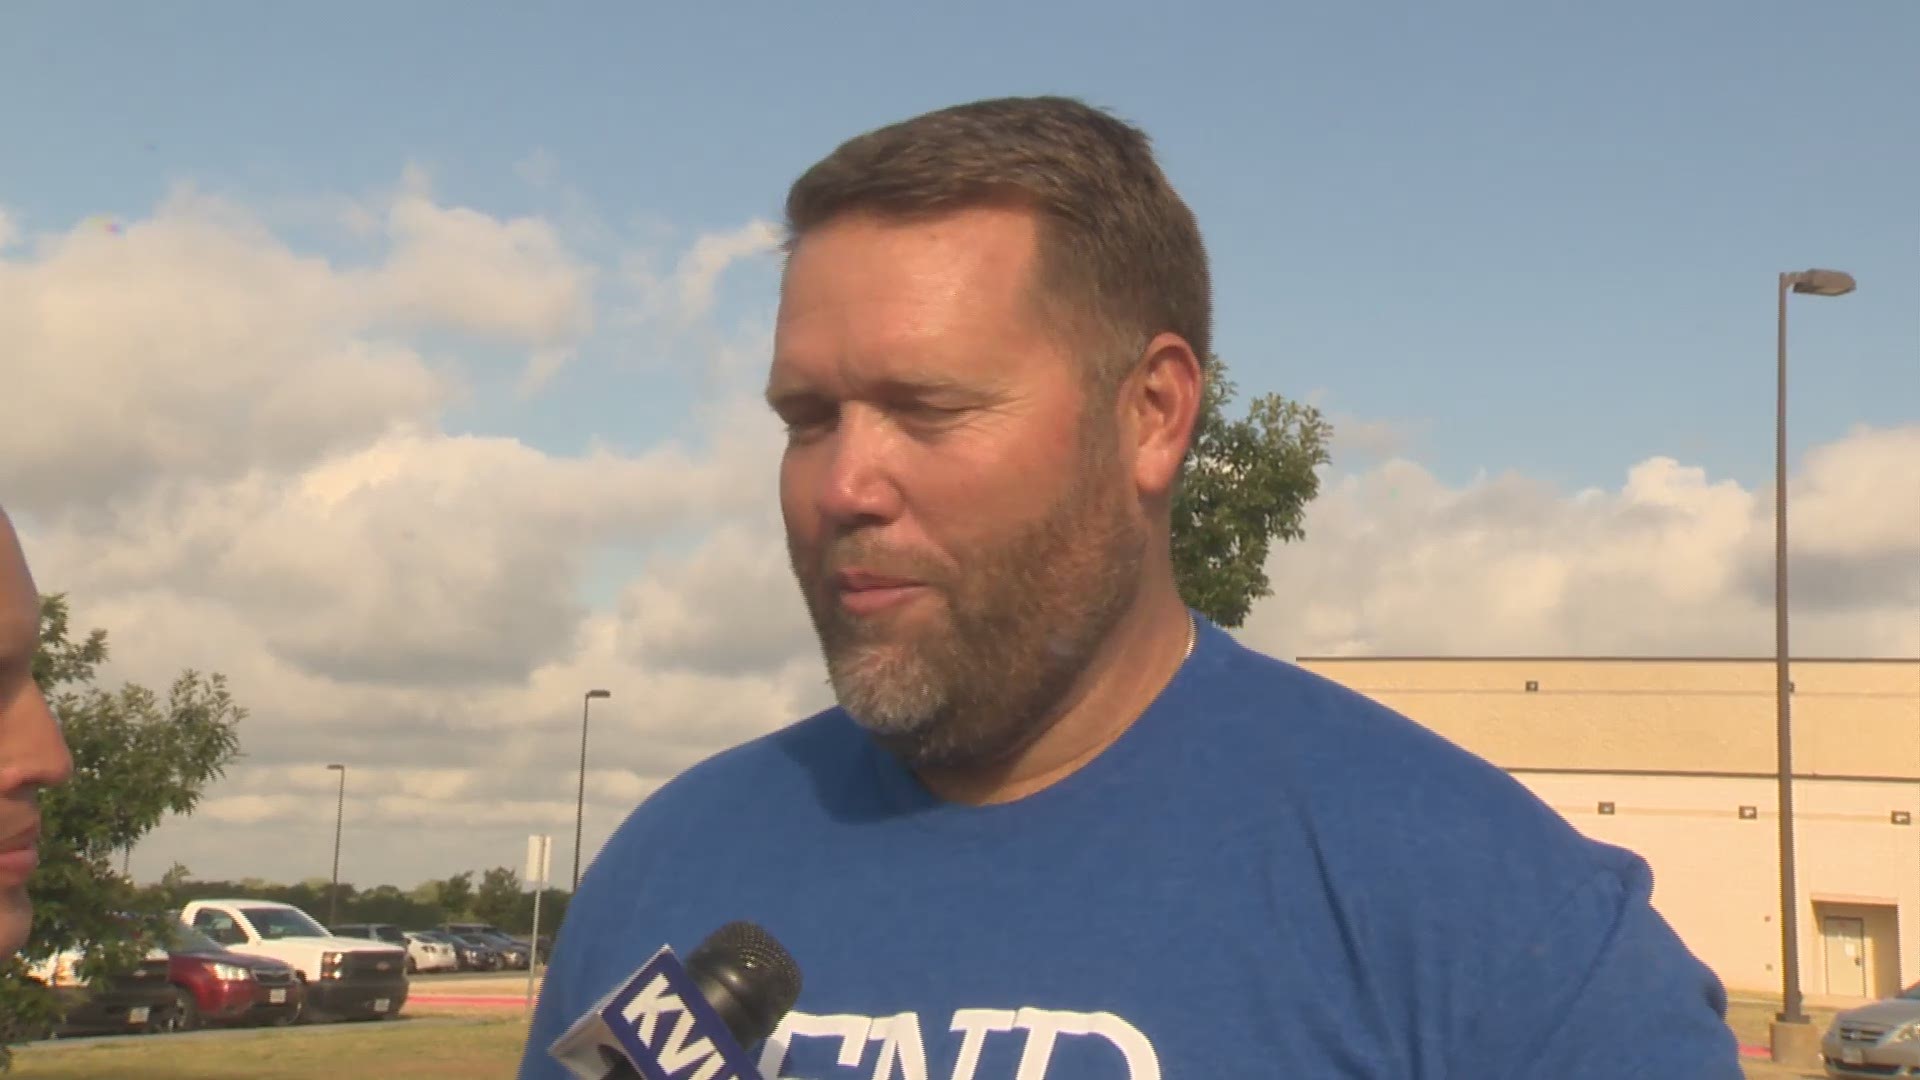 KVUE's Shawn Clynch talks with Georgetown coach Jason Dean about the upcoming season